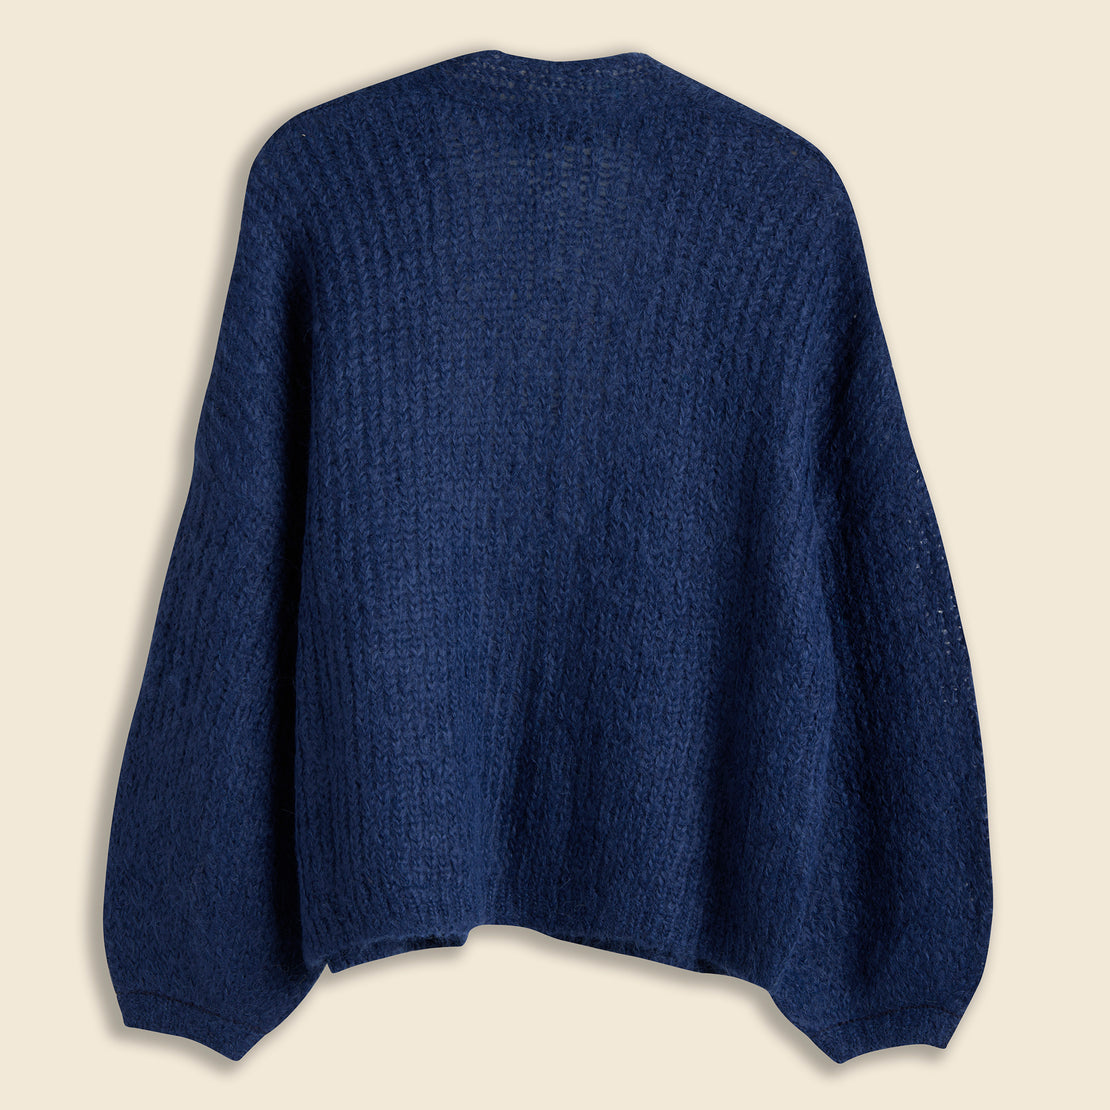 Cora Cardigan - Navy - Atelier Delphine - STAG Provisions - W - Tops - Sweater